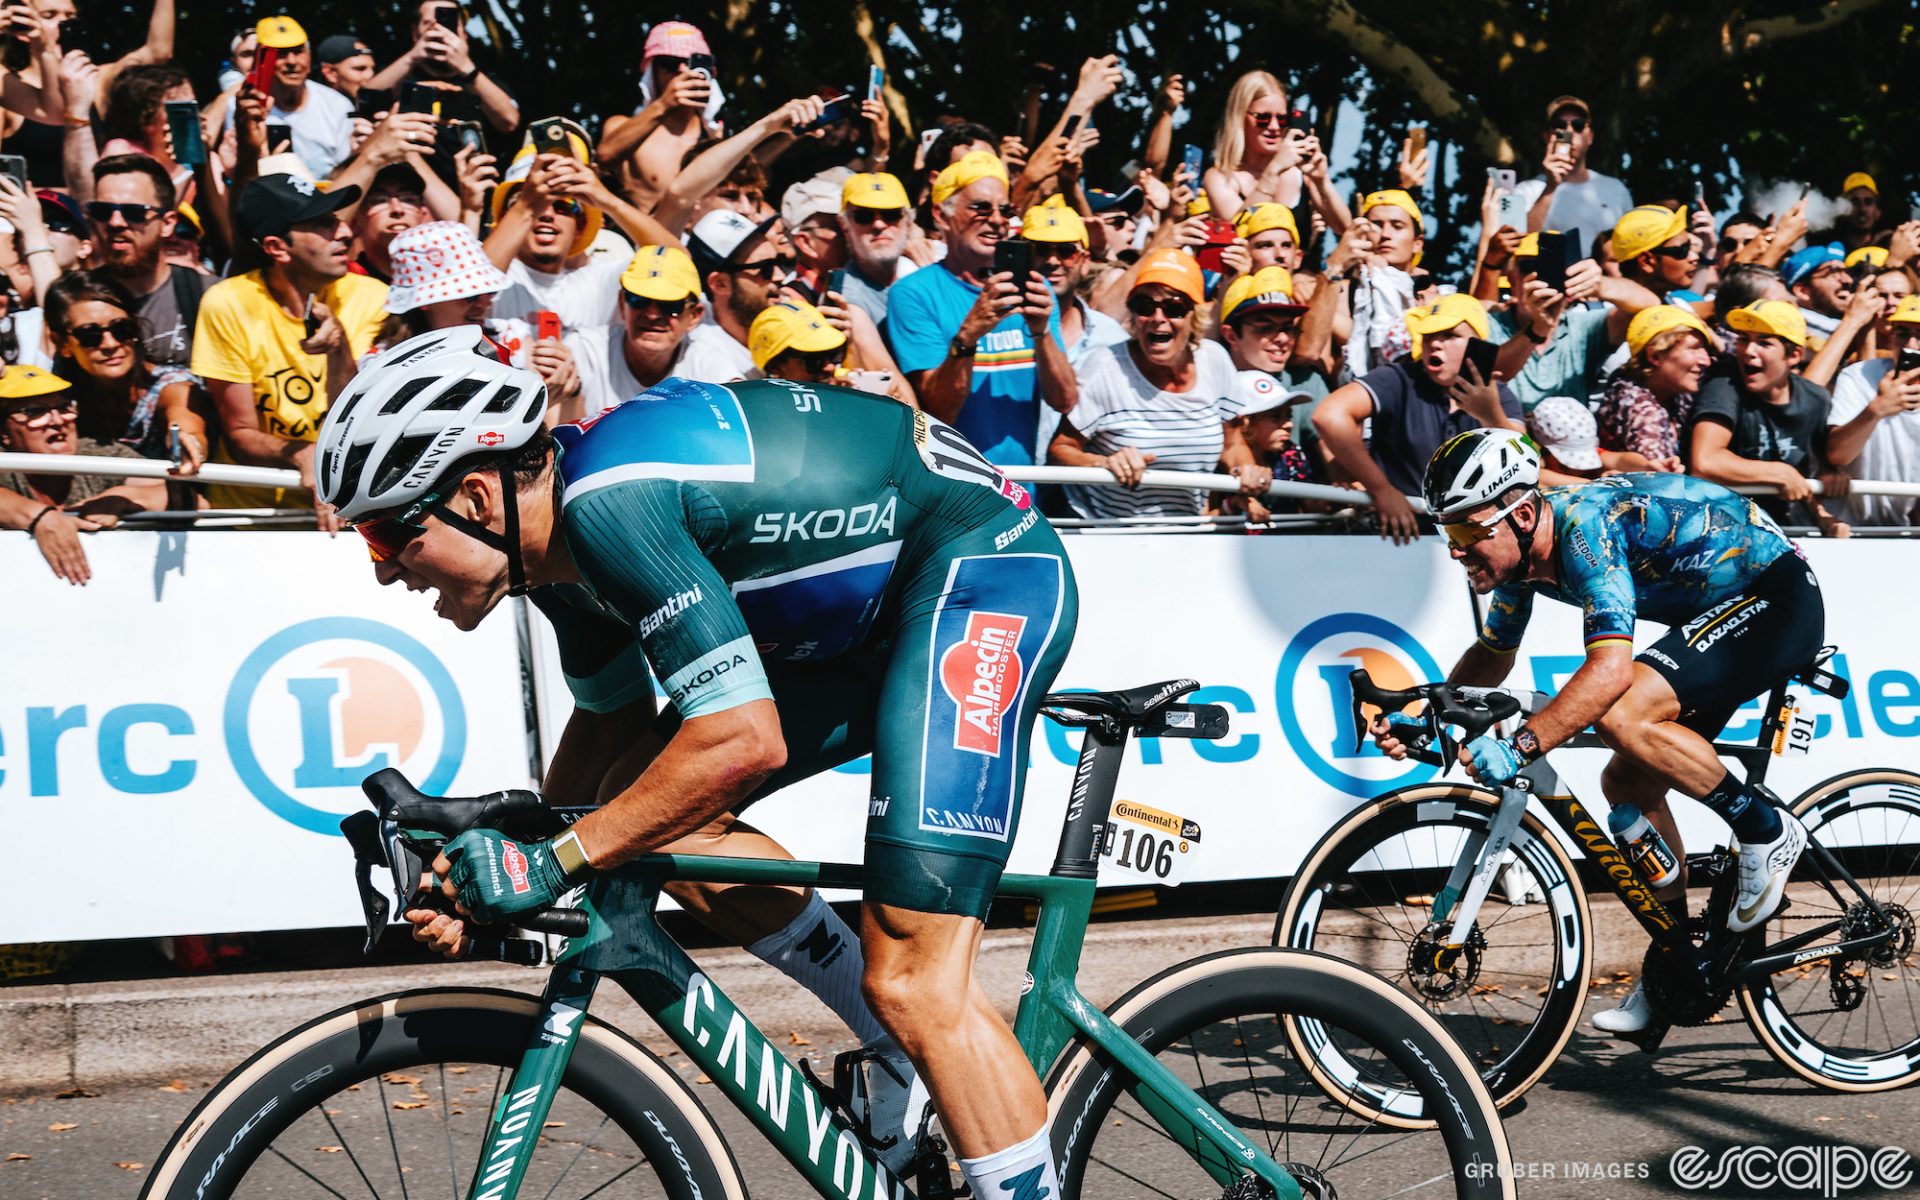 Jasper Philipsen, now wearing the green jersey of best sprinter, dashes to the line in stage 7 of the Tour. He's aboard a matching green Canyon and behind and to his right is Mark Cavendish, who will finish second, just denied in his quest for a record-breaking 35th Tour stage win.